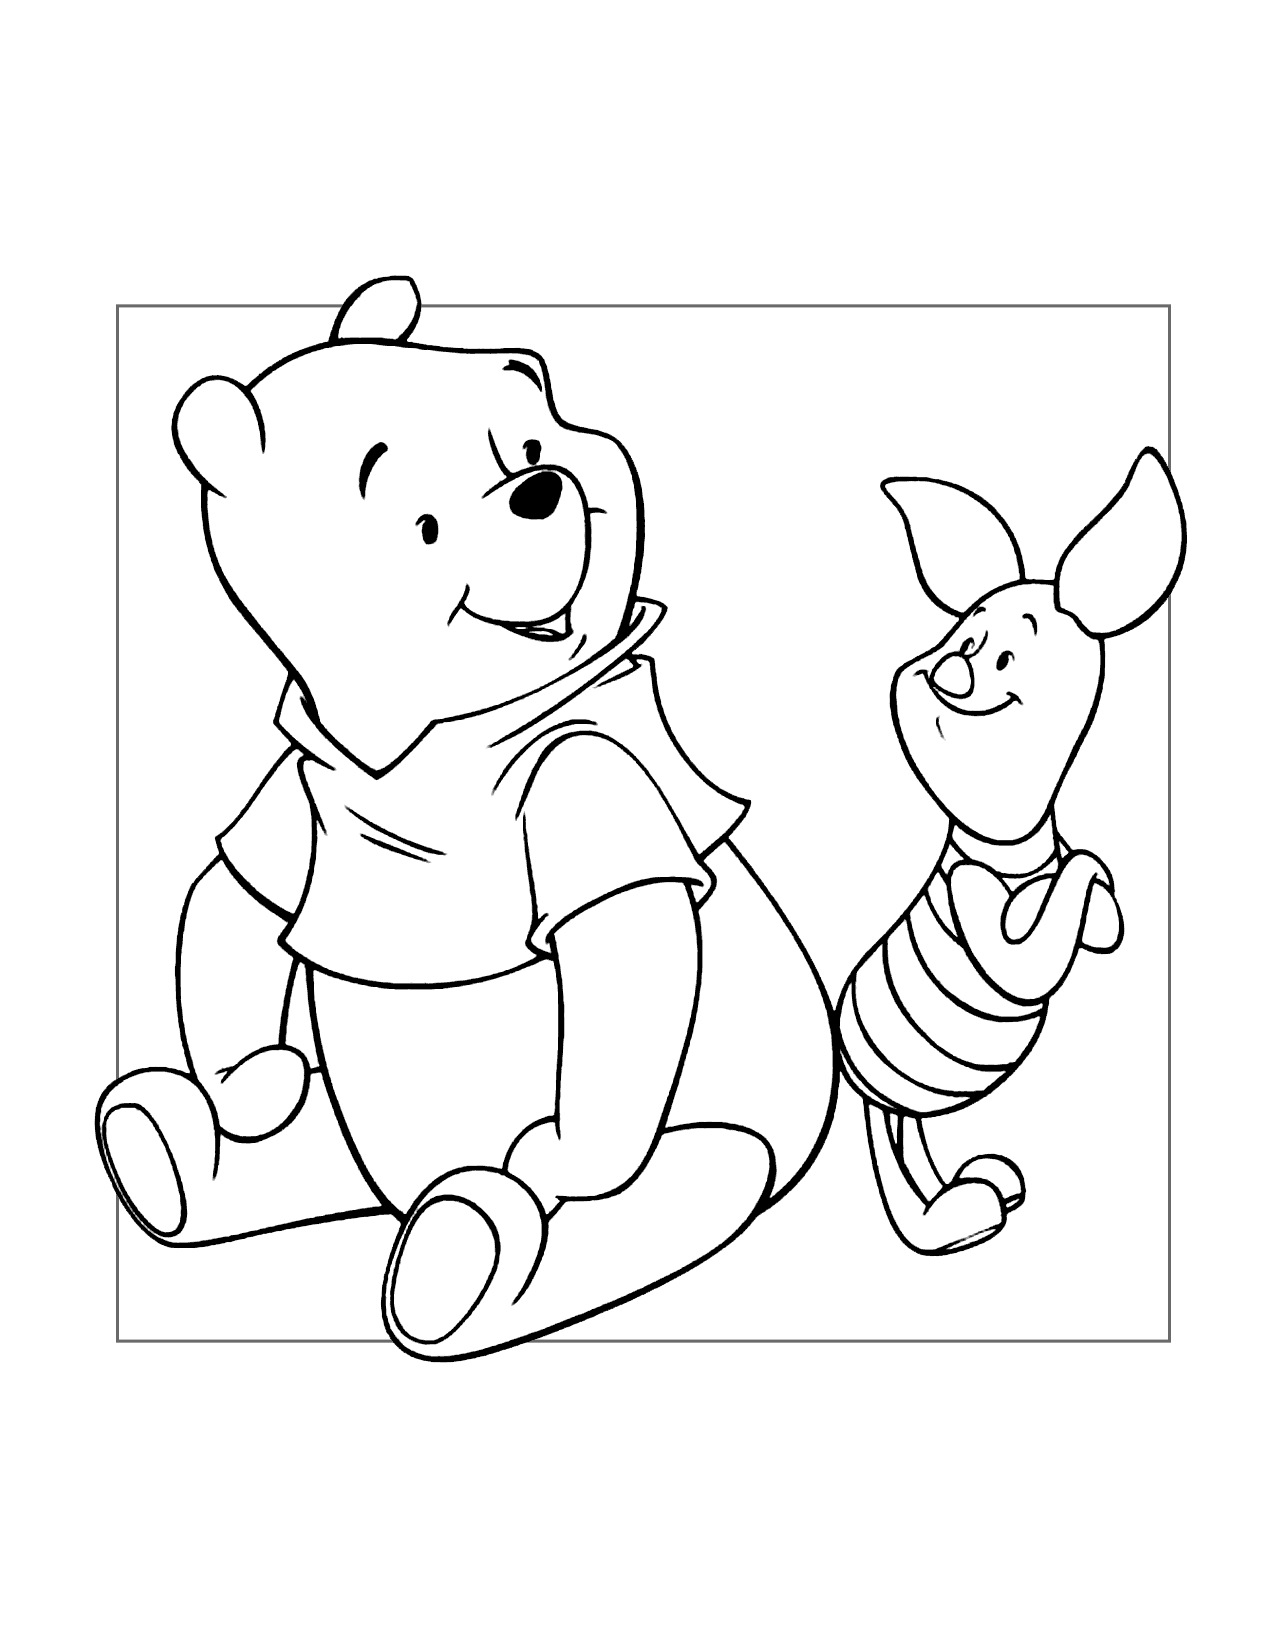 Cute Pooh And Piglet Coloring Page